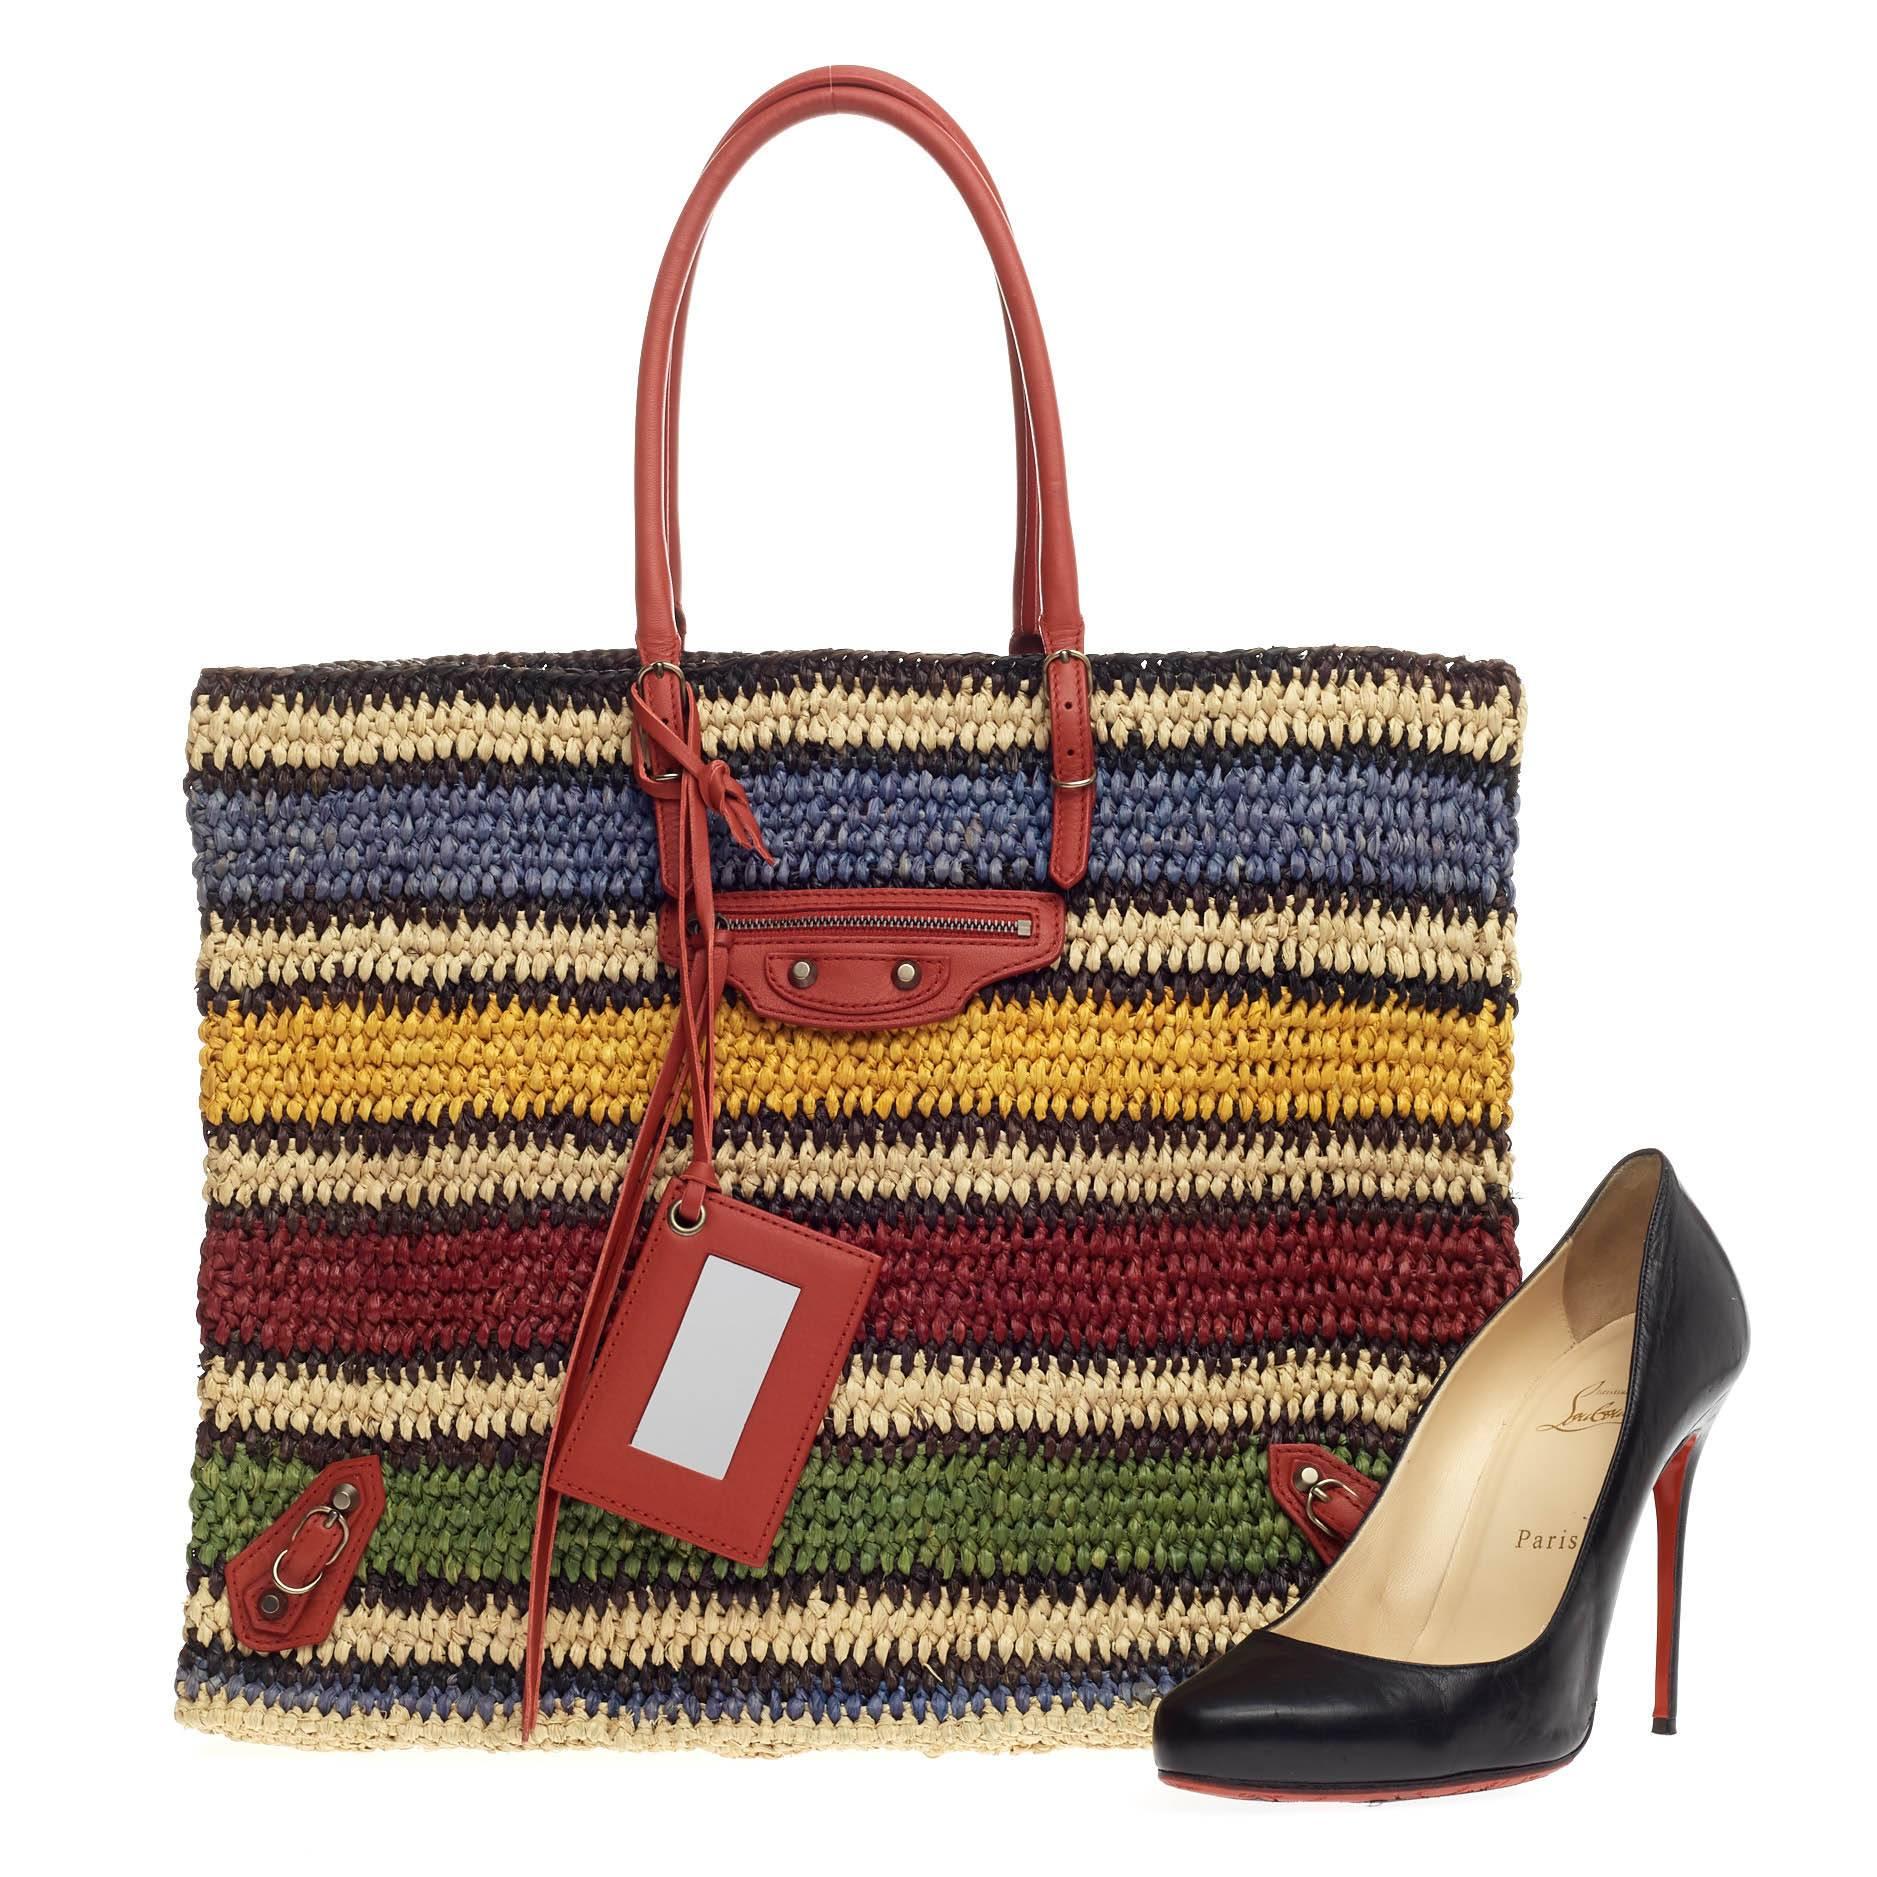 This authentic Balenciaga Papier A4 Woven Raffia is a casual, fun accessory perfect for everyday excursions or weekend travels. Crafted in multicolored woven raffia, this lightweight tote features slim handles, front zip pocket, iconic Balenciaga